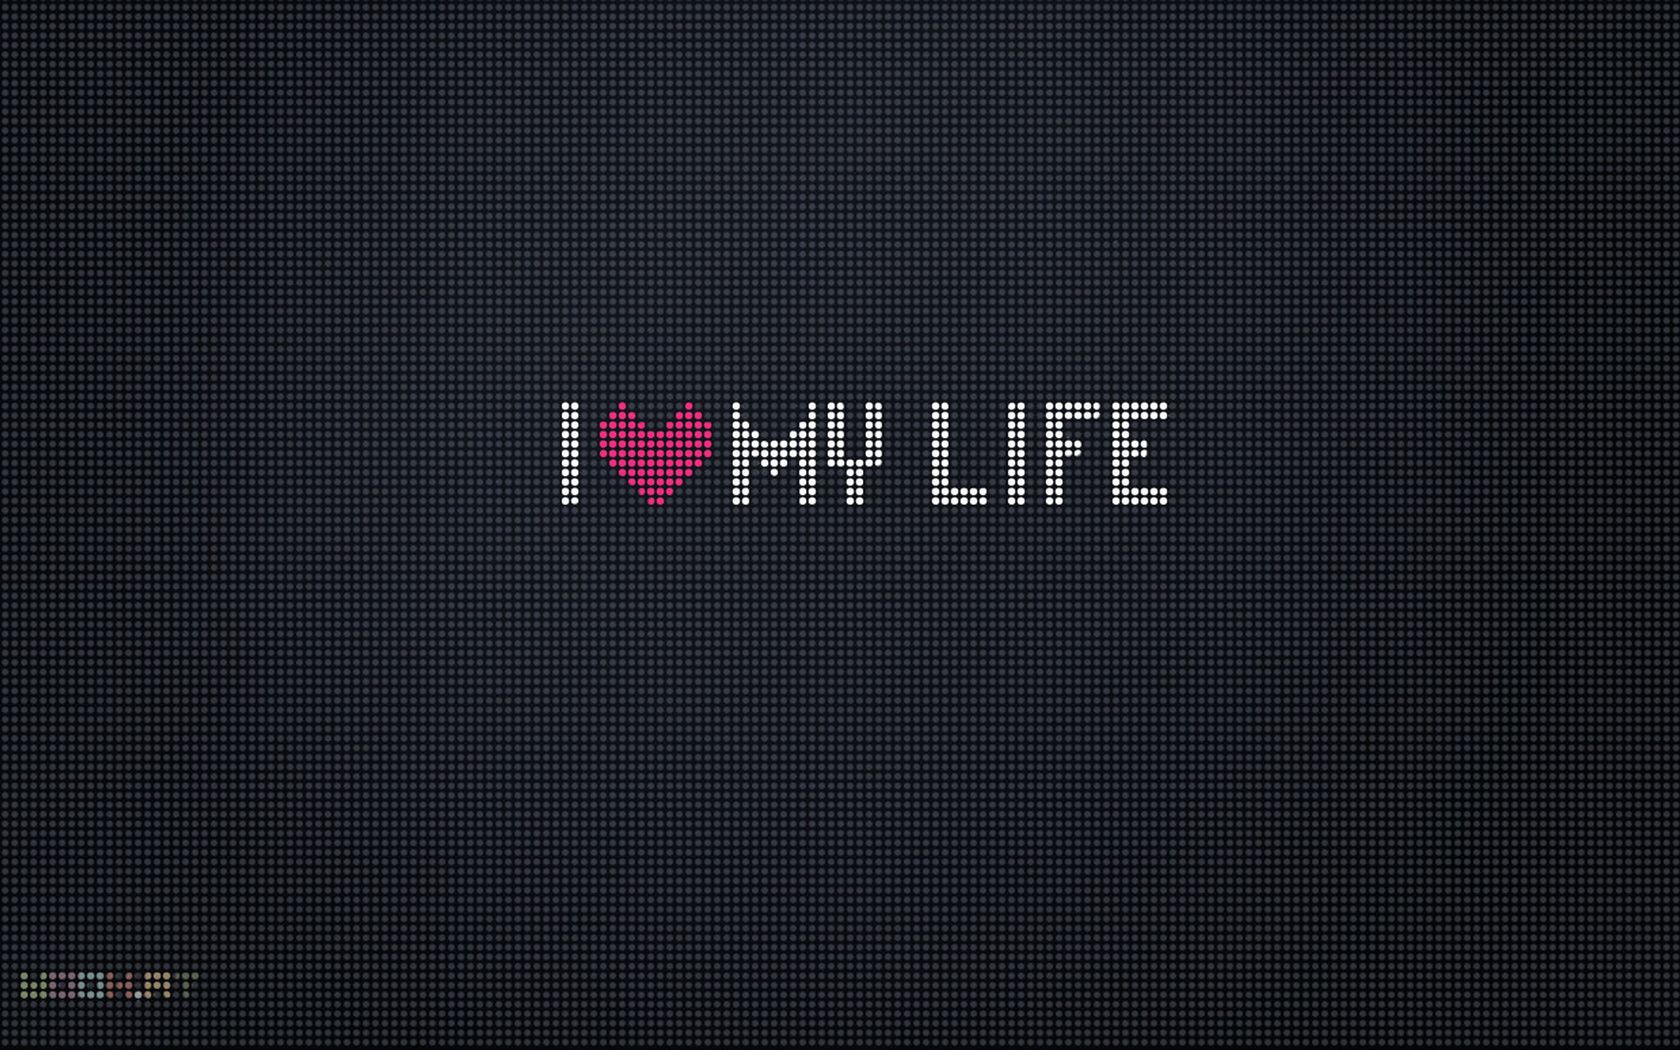 Love Life Wallpaper Free Love Life Background